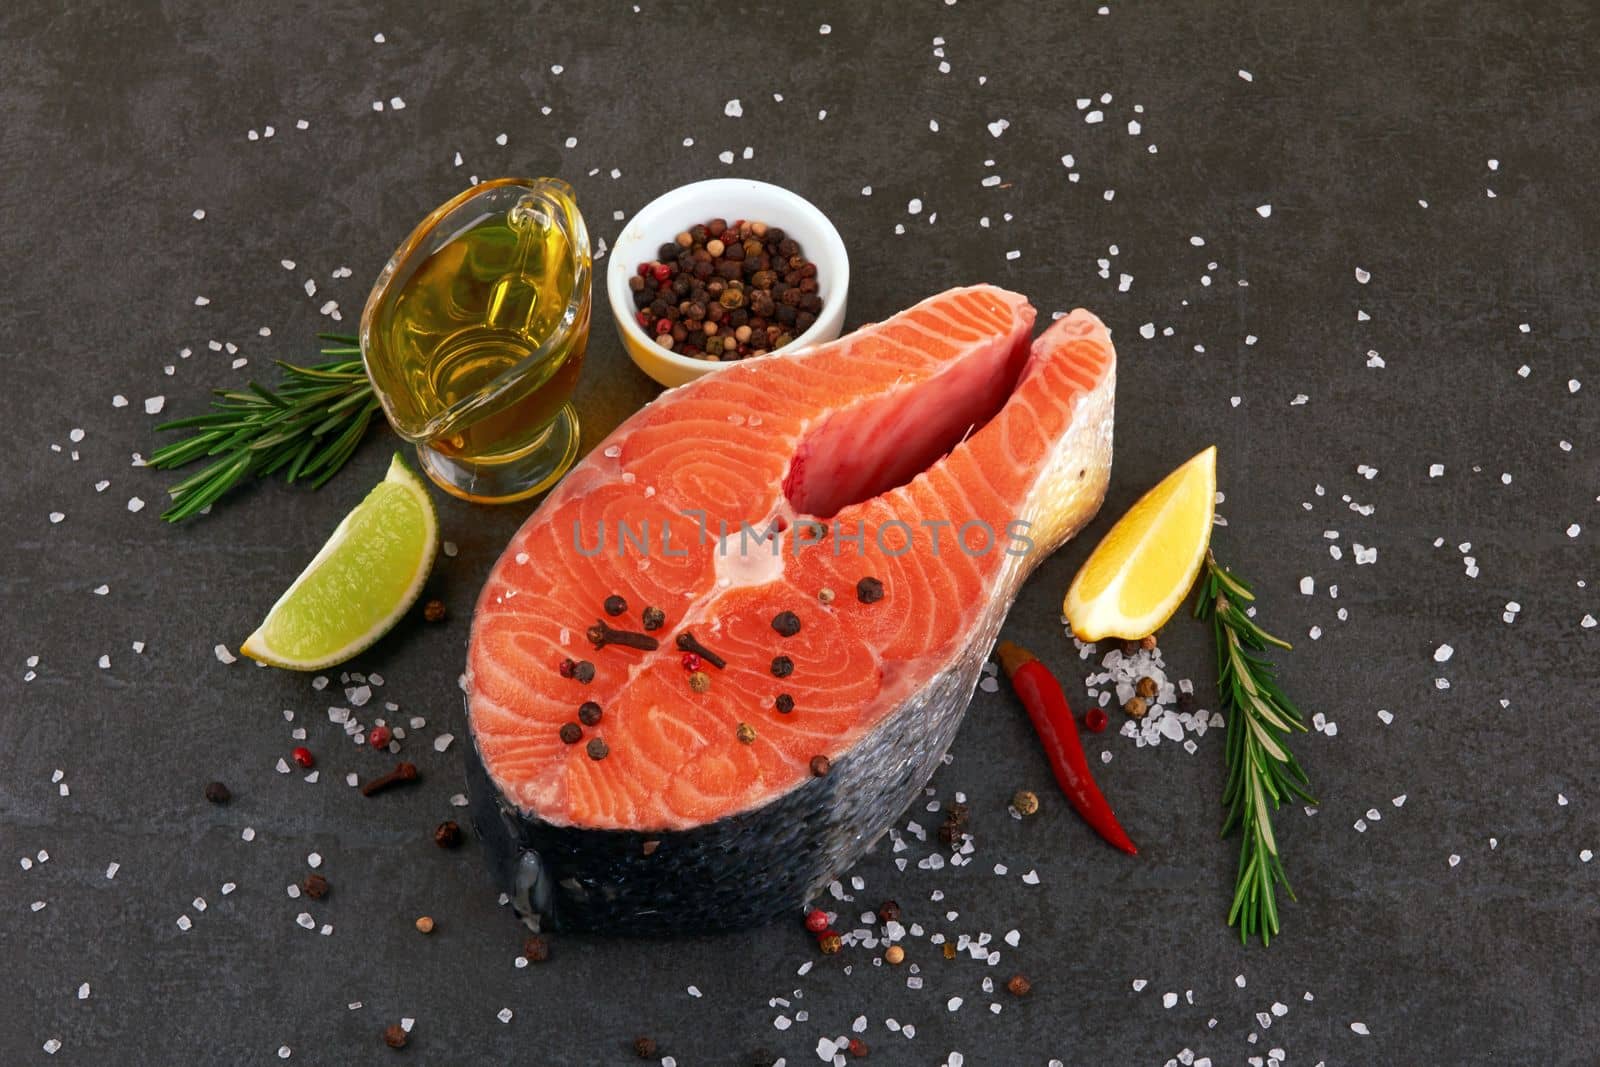 Salmon steak on a black background with spices